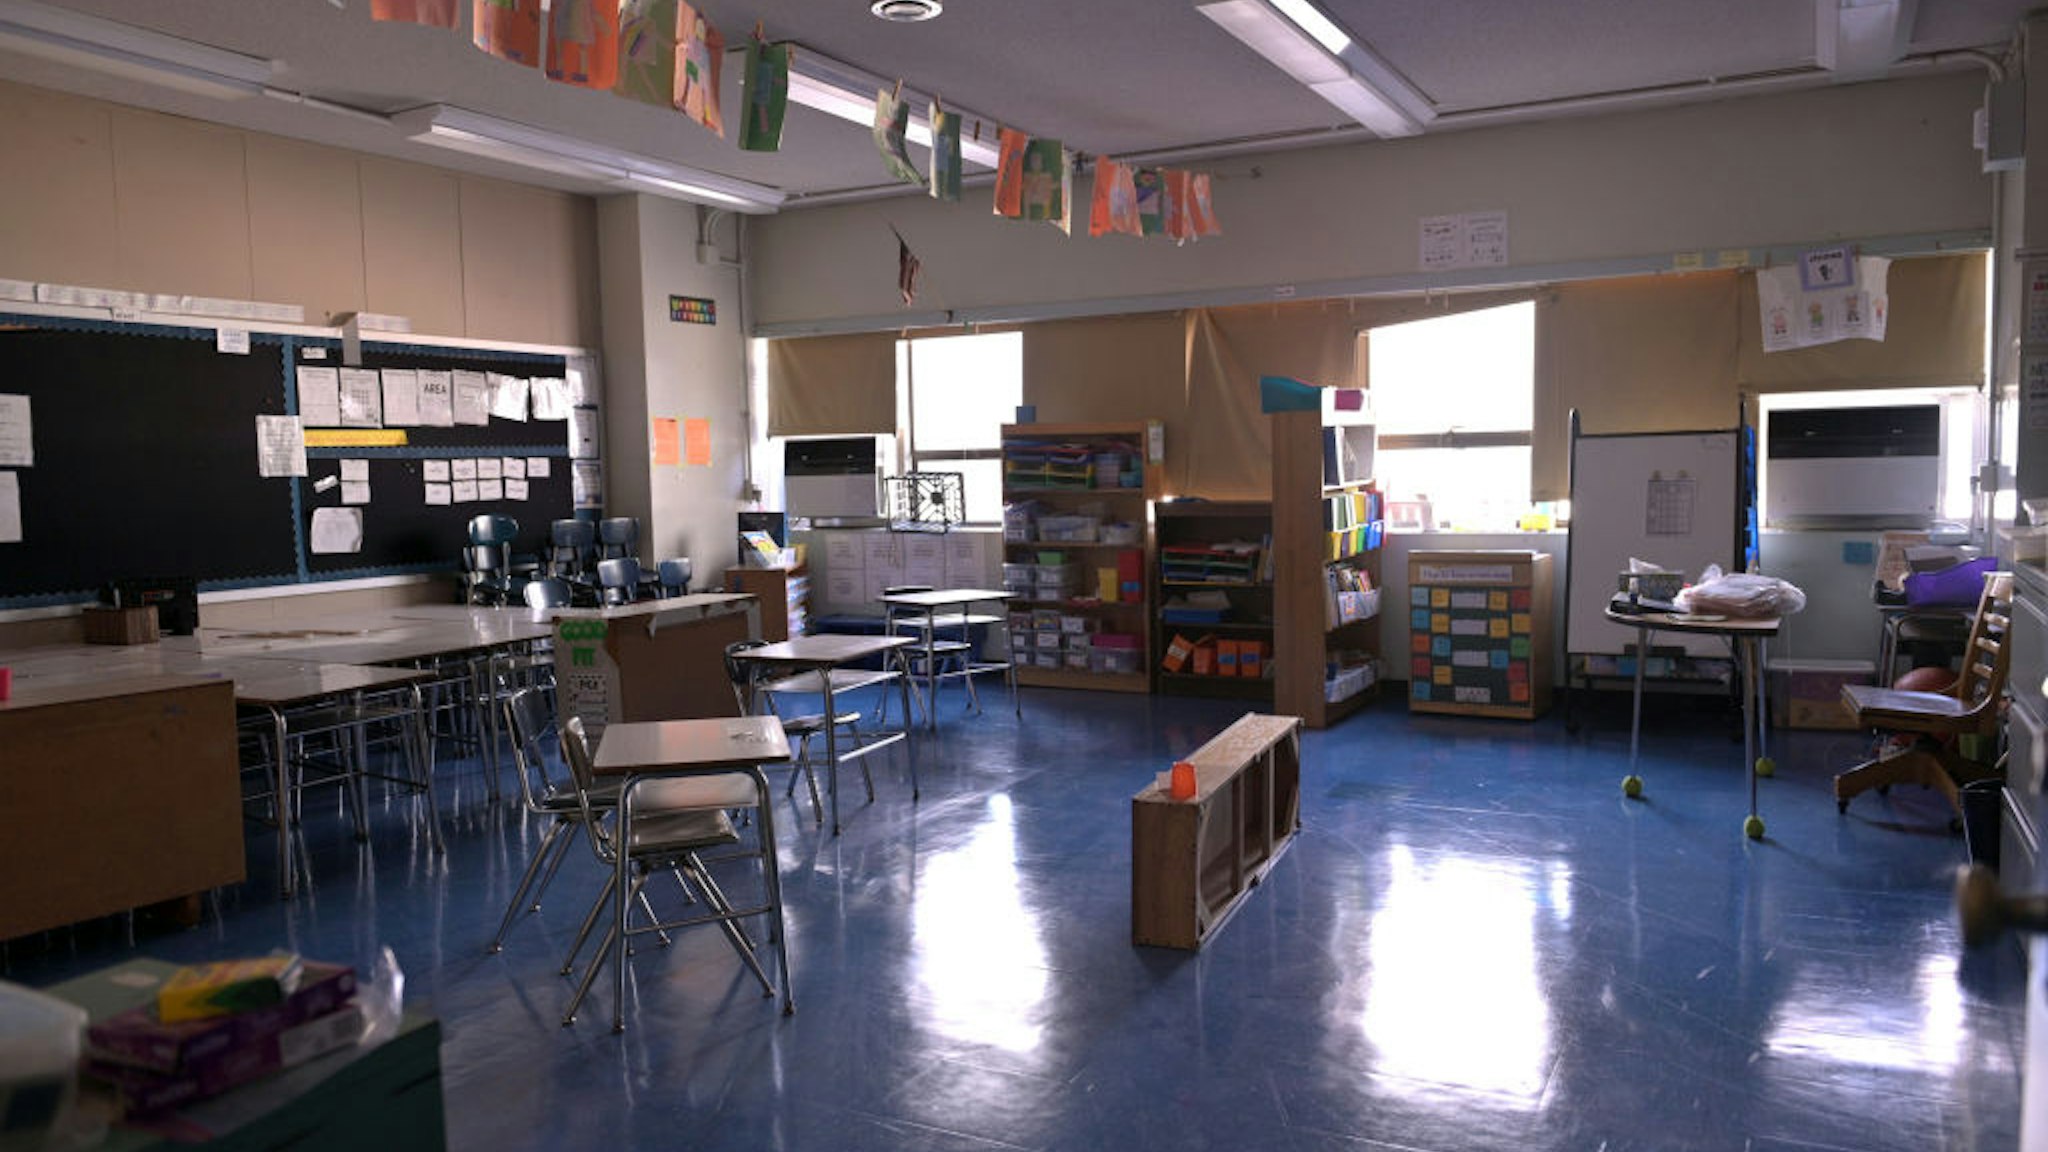 NEW YORK, NEW YORK - NOVEMBER 19: A classroom is empty with the lights off on what would otherwise be a blended learning school day on November 19, 2020 at Yung Wing School P.S. 124 in New York City. NYC Mayor Bill DeBlasio had to return the nation’s largest district had to all-remote teaching/learning as of today, with an indefinite outlook for reopening.